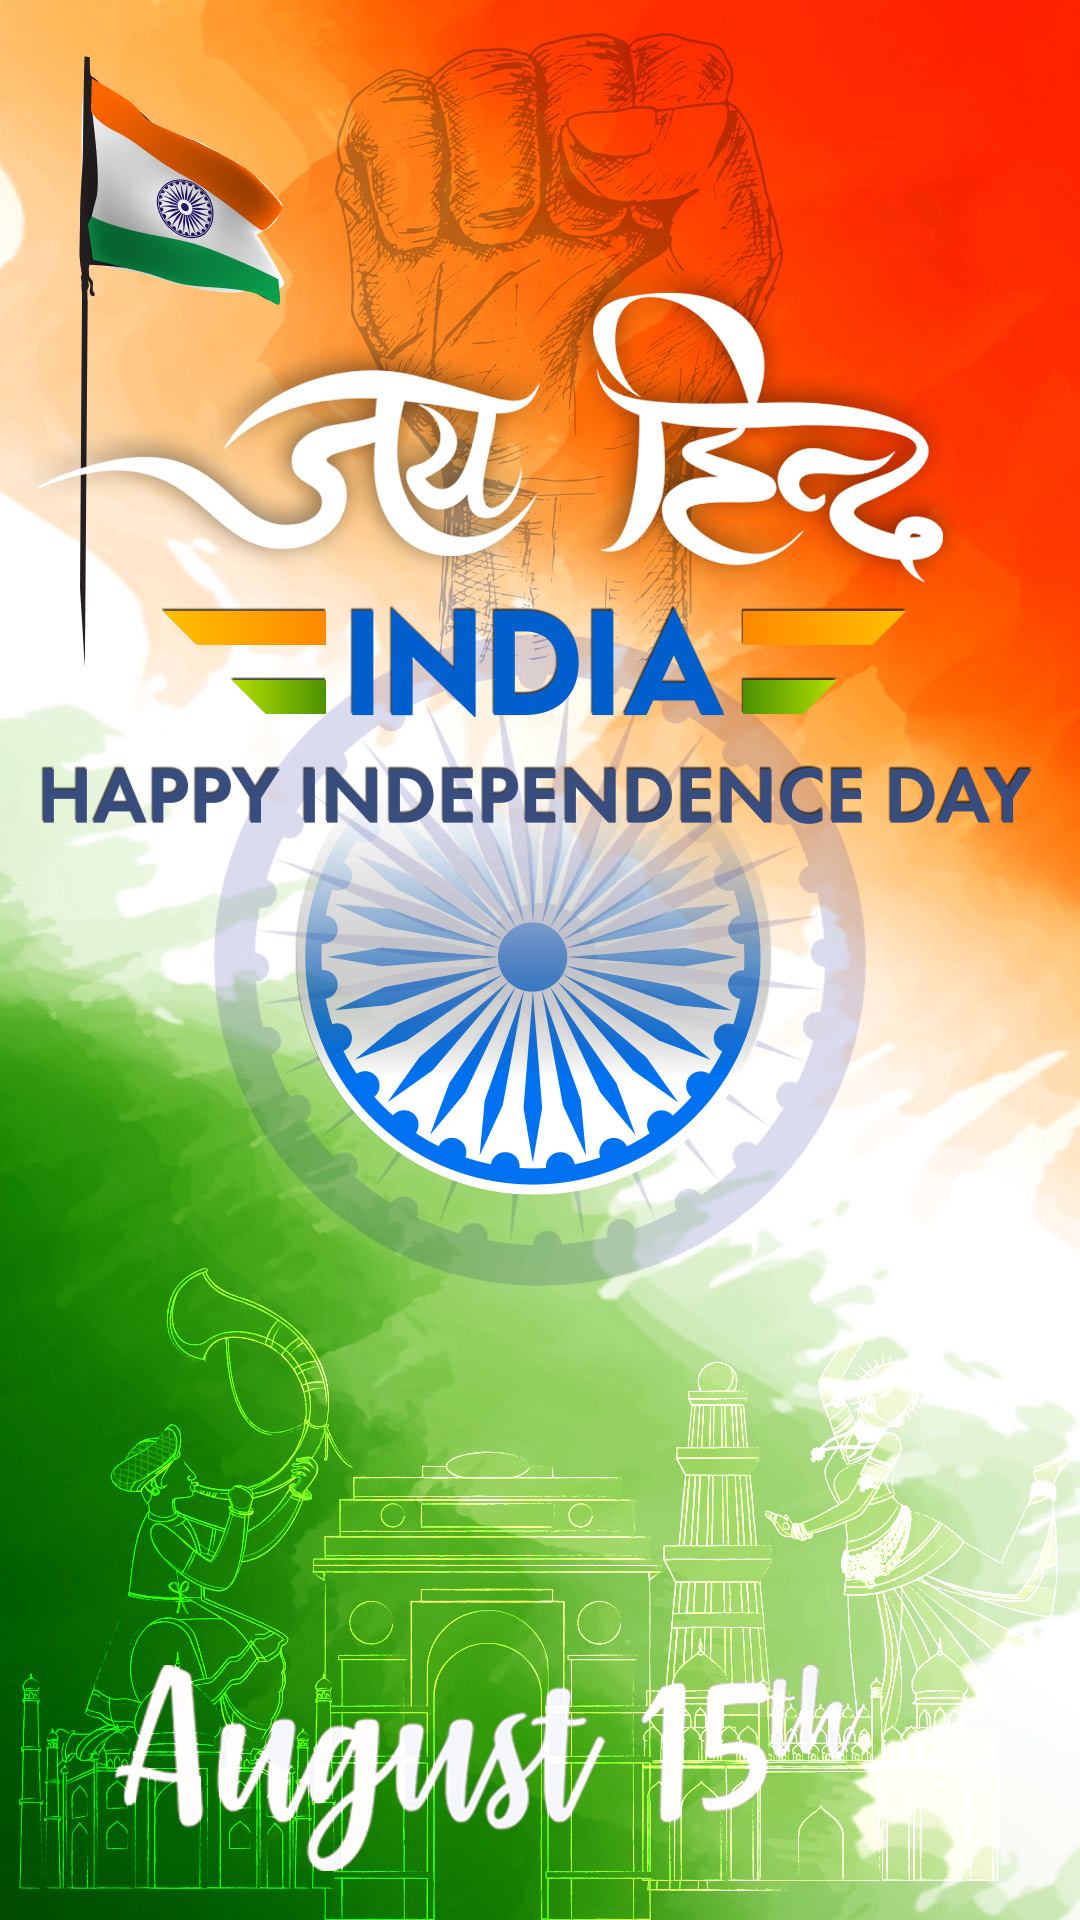 Happy independence day India WhatsApp status - independence day images HD wallpapers, cards